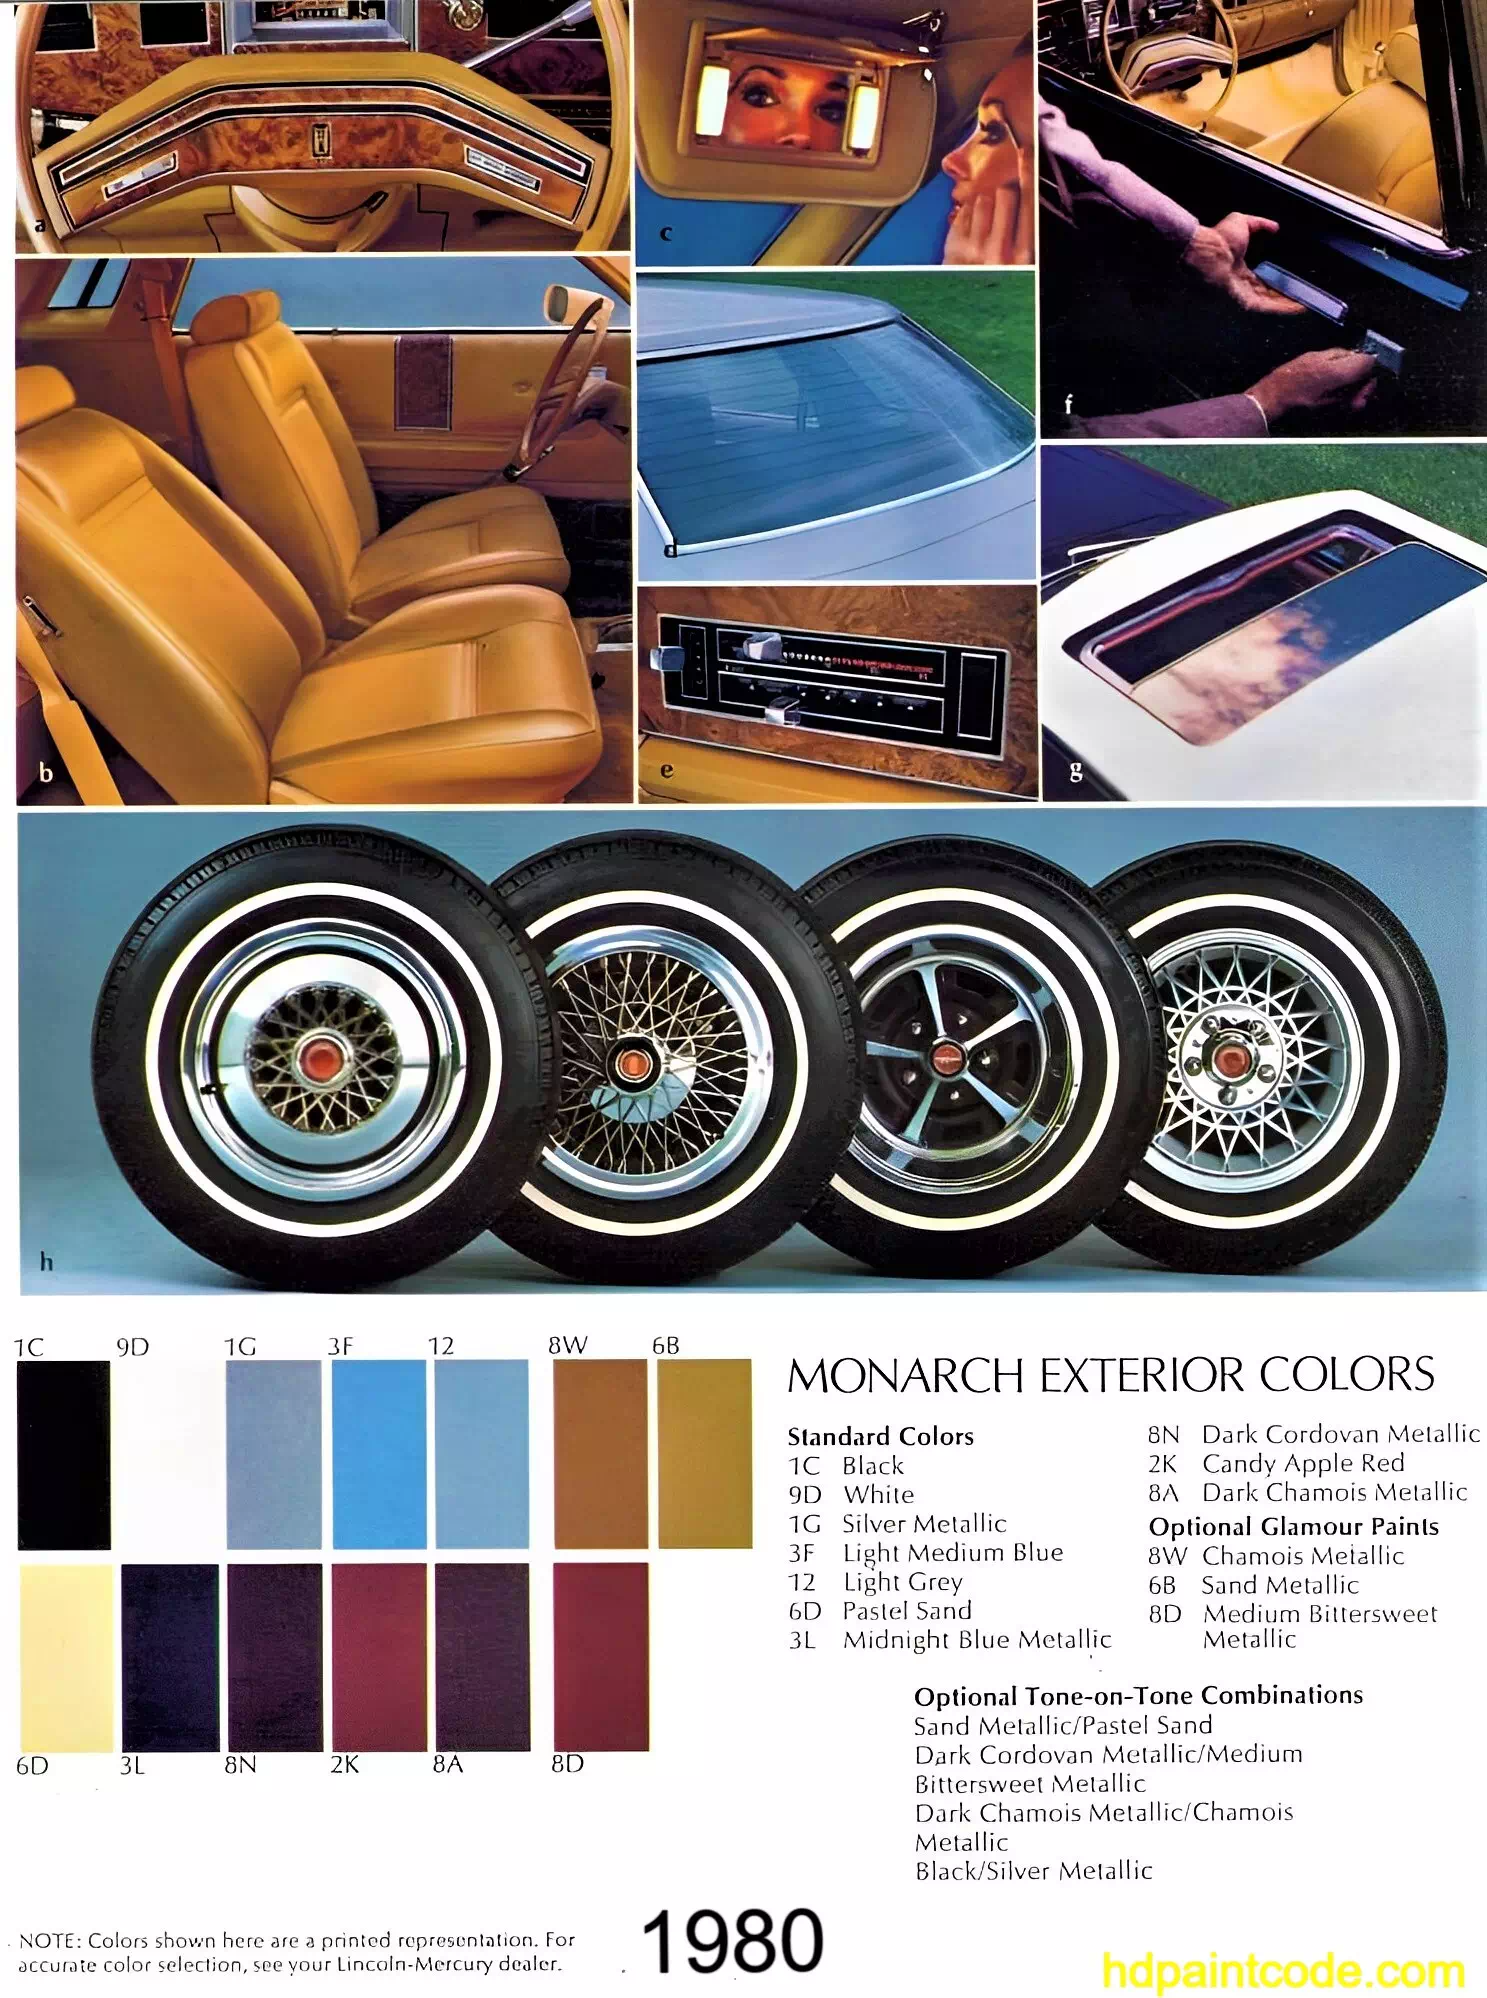 Paint codes, Exterior Colors, and Vehicle Rims used on the 1980 Mercury Monarch automobiles